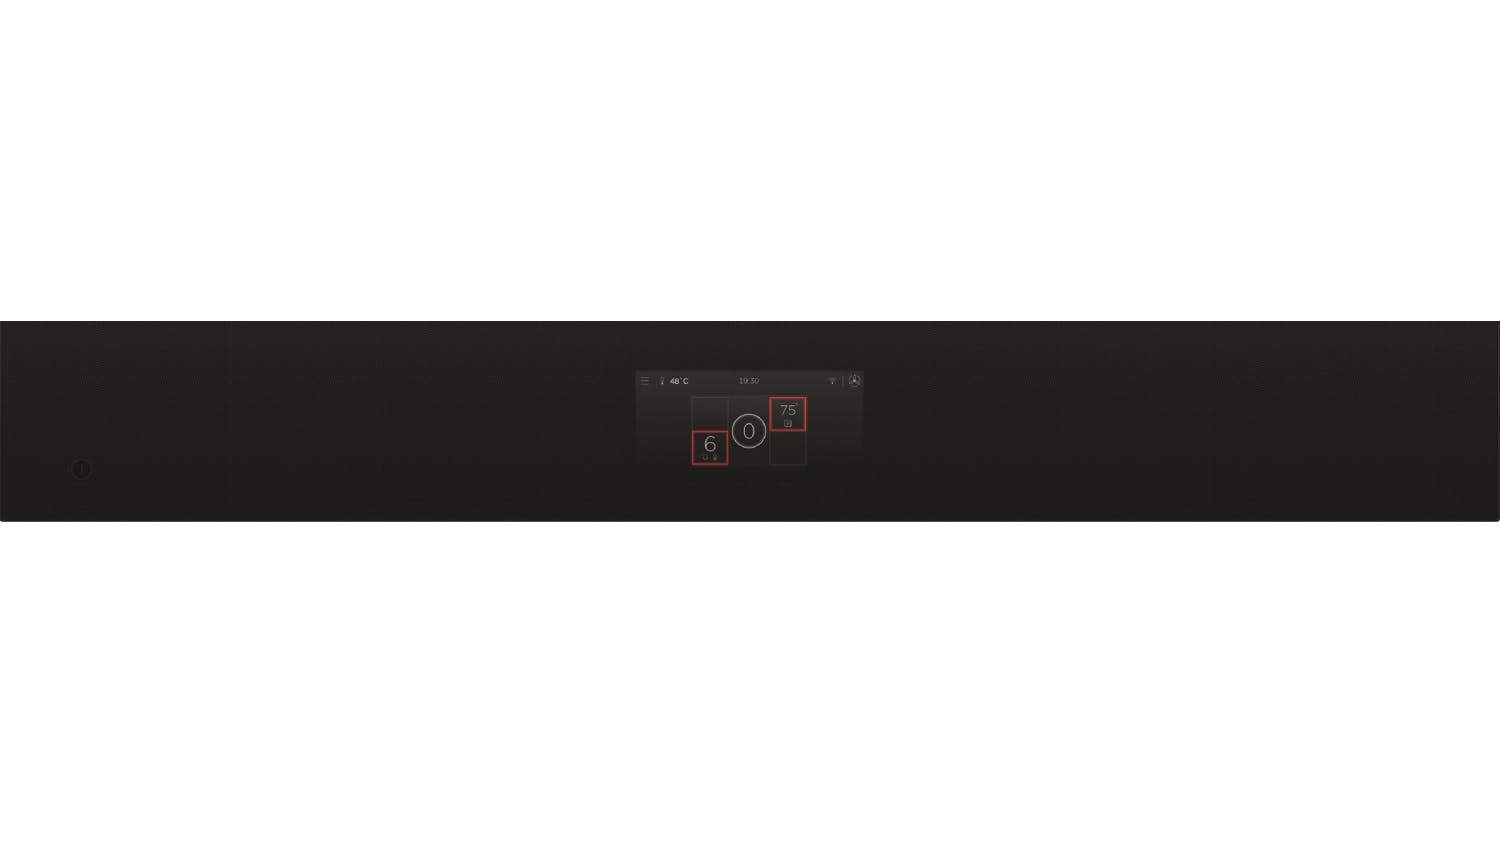 Fisher & Paykel 90cm Primary Modular 5 Zone Induction Cooktop - Black (Series 9/CI905DTTB1)